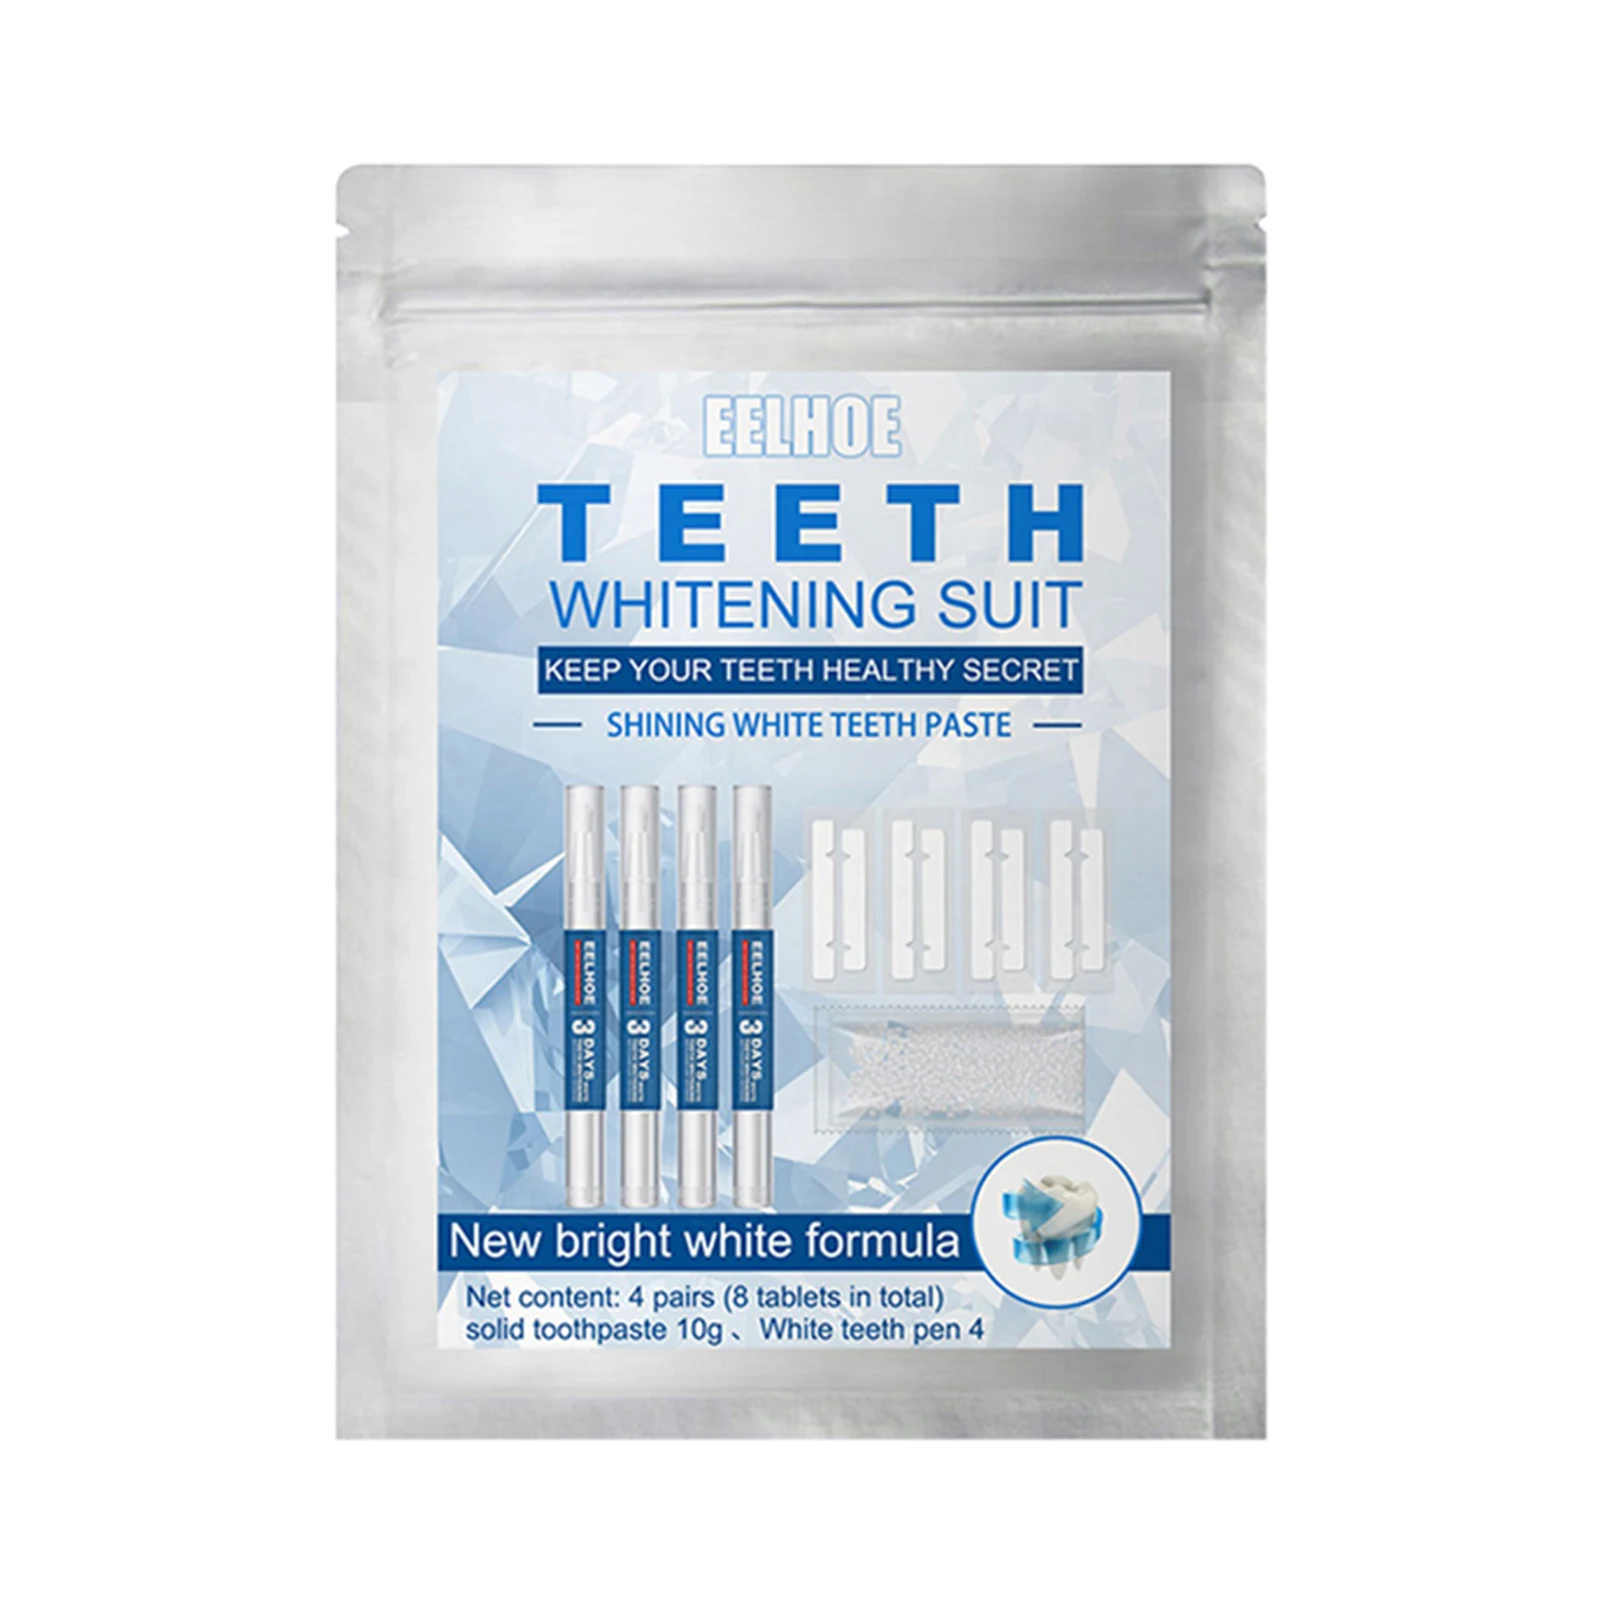 

Teeth Whitening Kit For Brighter Smile Oral Hygiene Home Effective Mint Flavor Safe Painless Portable Remove Plaque Stains Gel